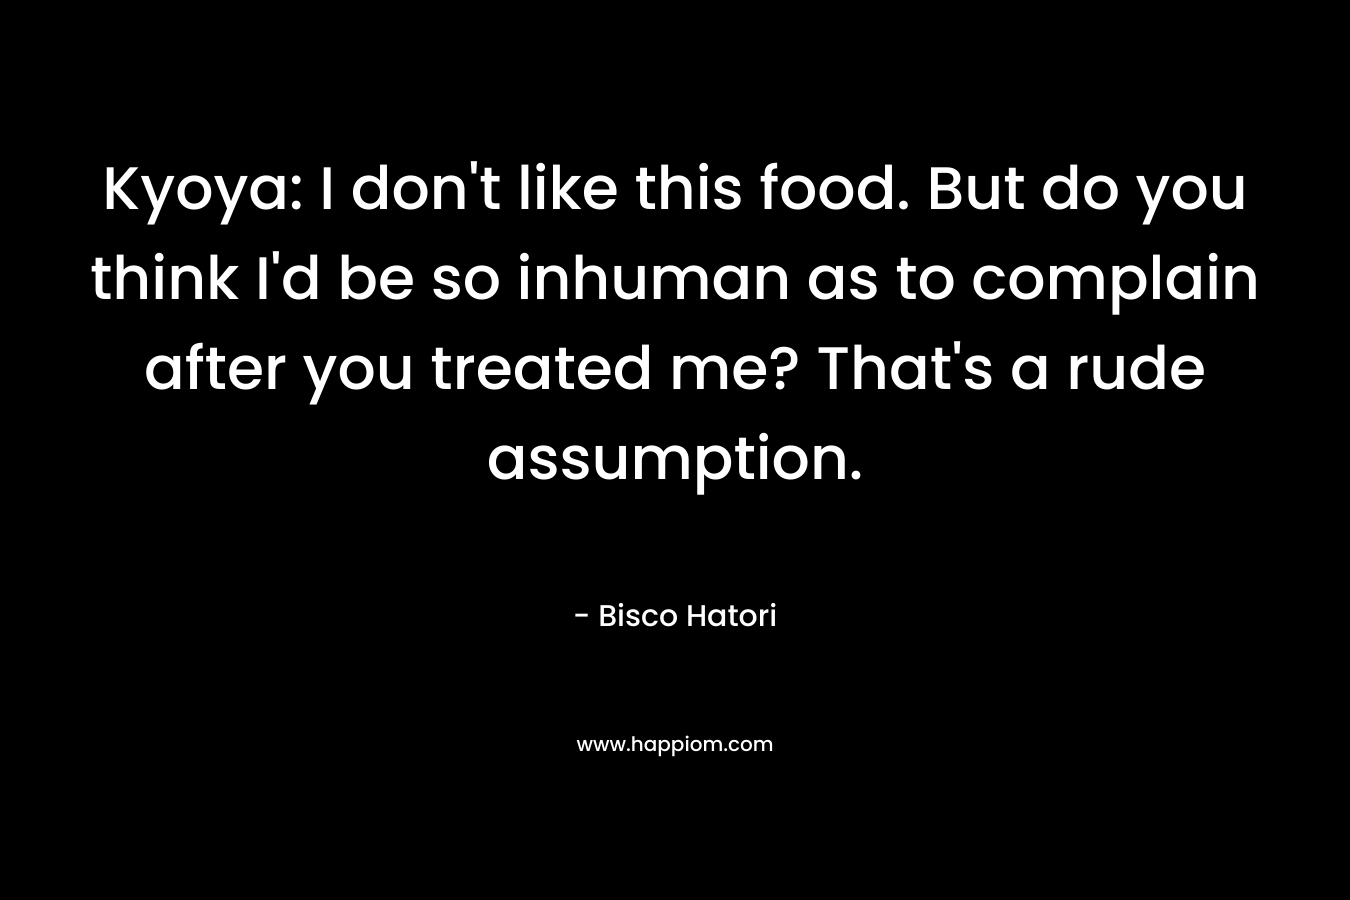 Kyoya: I don’t like this food. But do you think I’d be so inhuman as to complain after you treated me? That’s a rude assumption. – Bisco Hatori